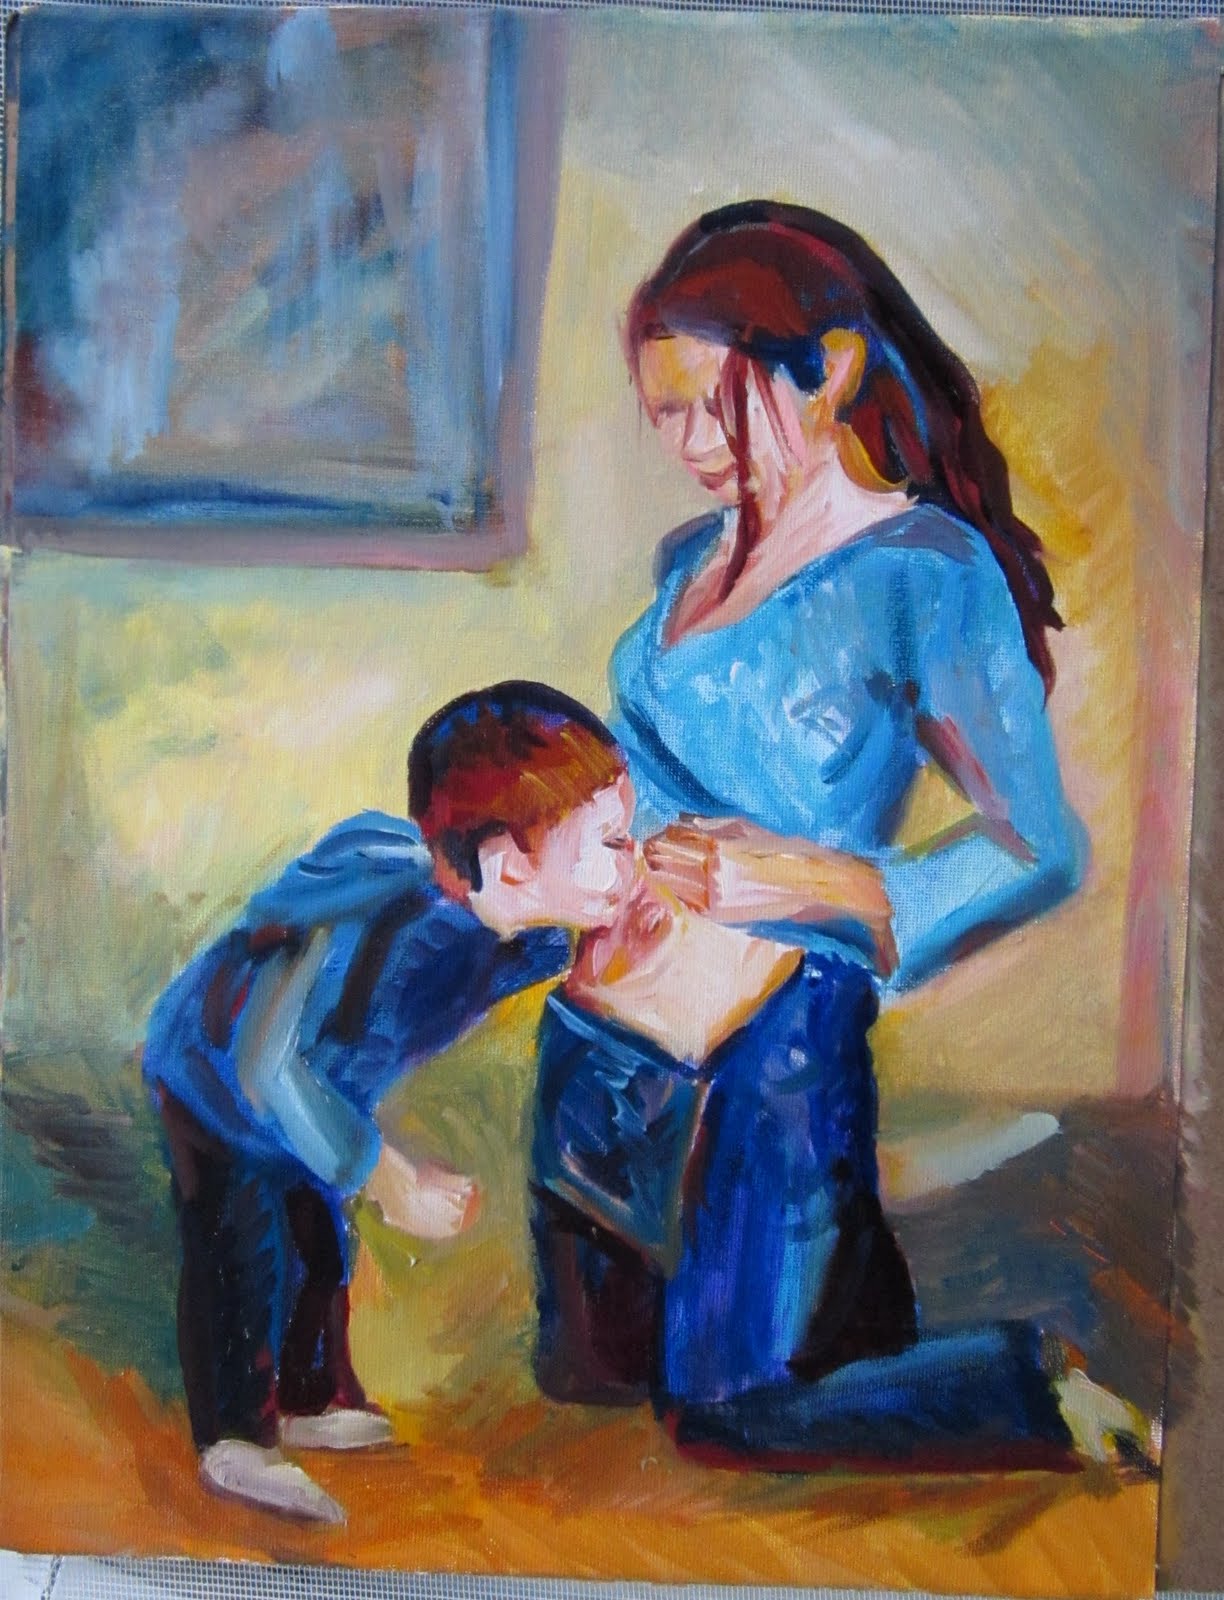 100 Paintings Challenge 2 Liz Cutler , Nevaeh's First Kiss ,Oil over acrylic sketch on canvas